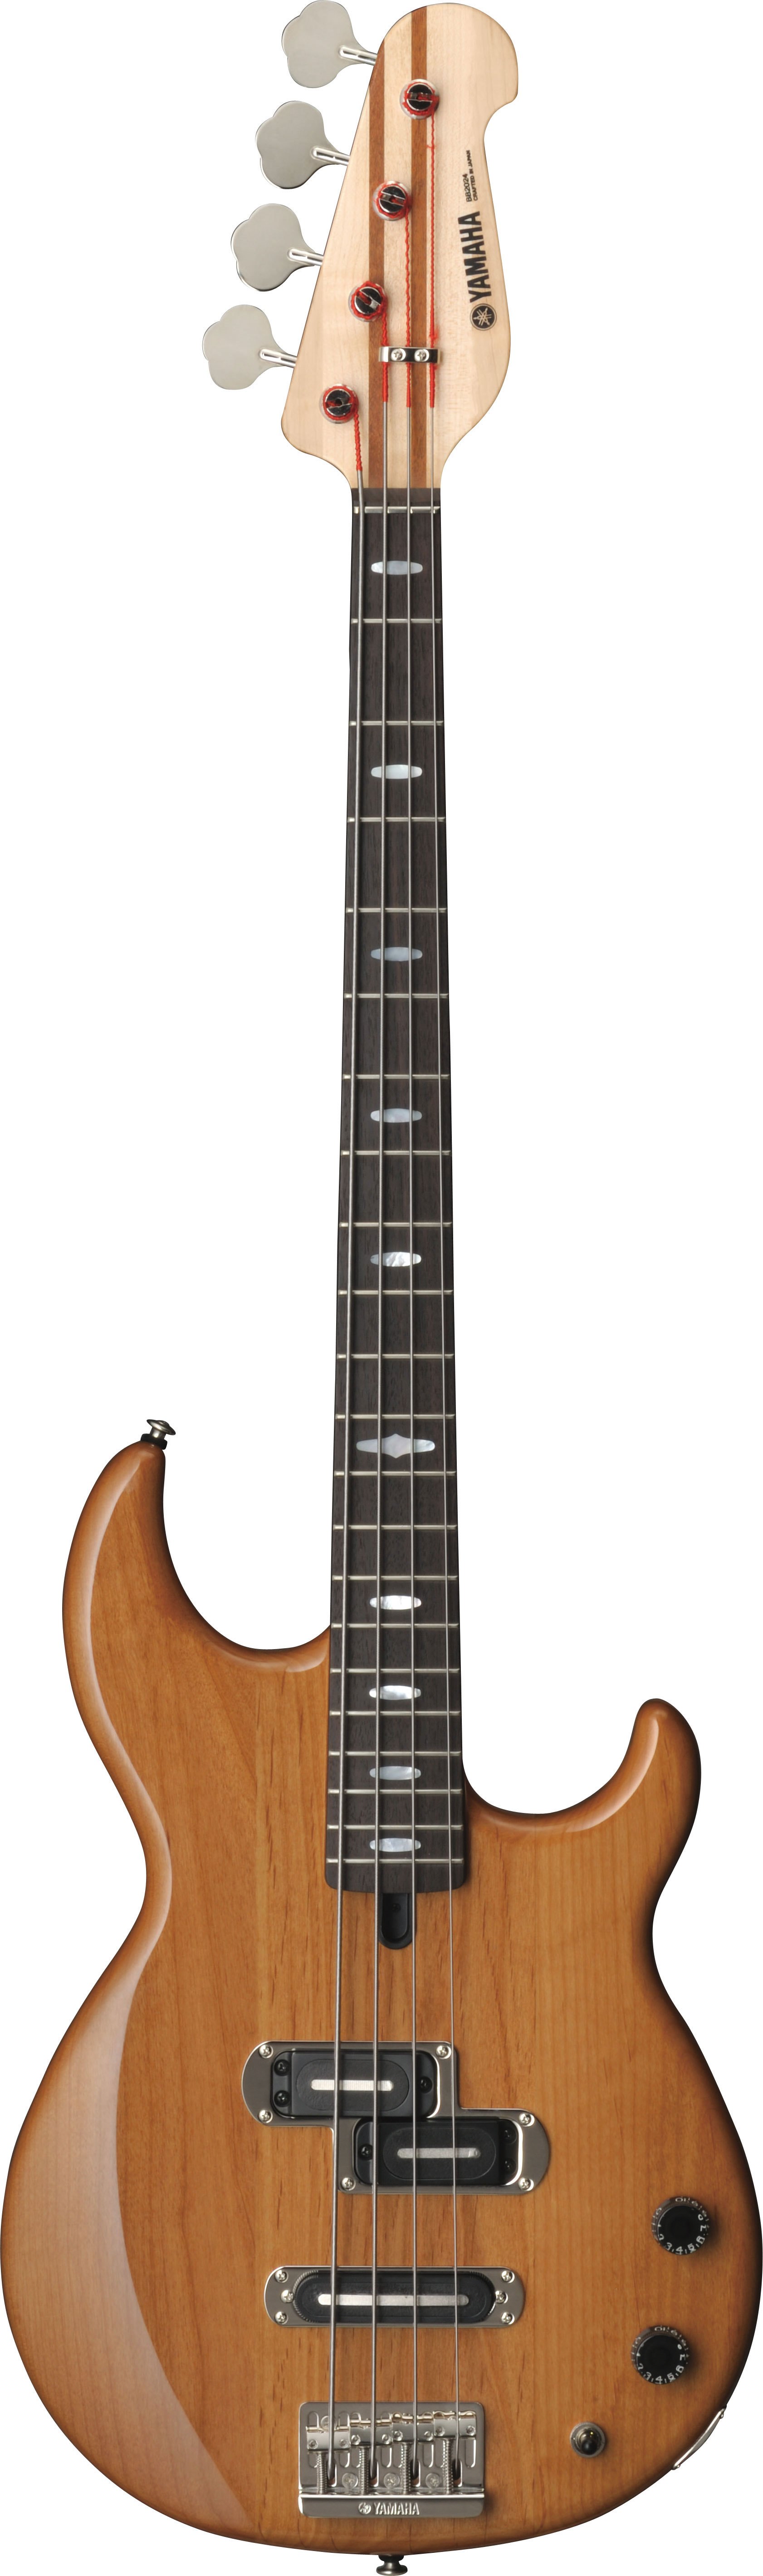 BB   Overview   Electric Basses   Guitars, Basses & Amps   Musical